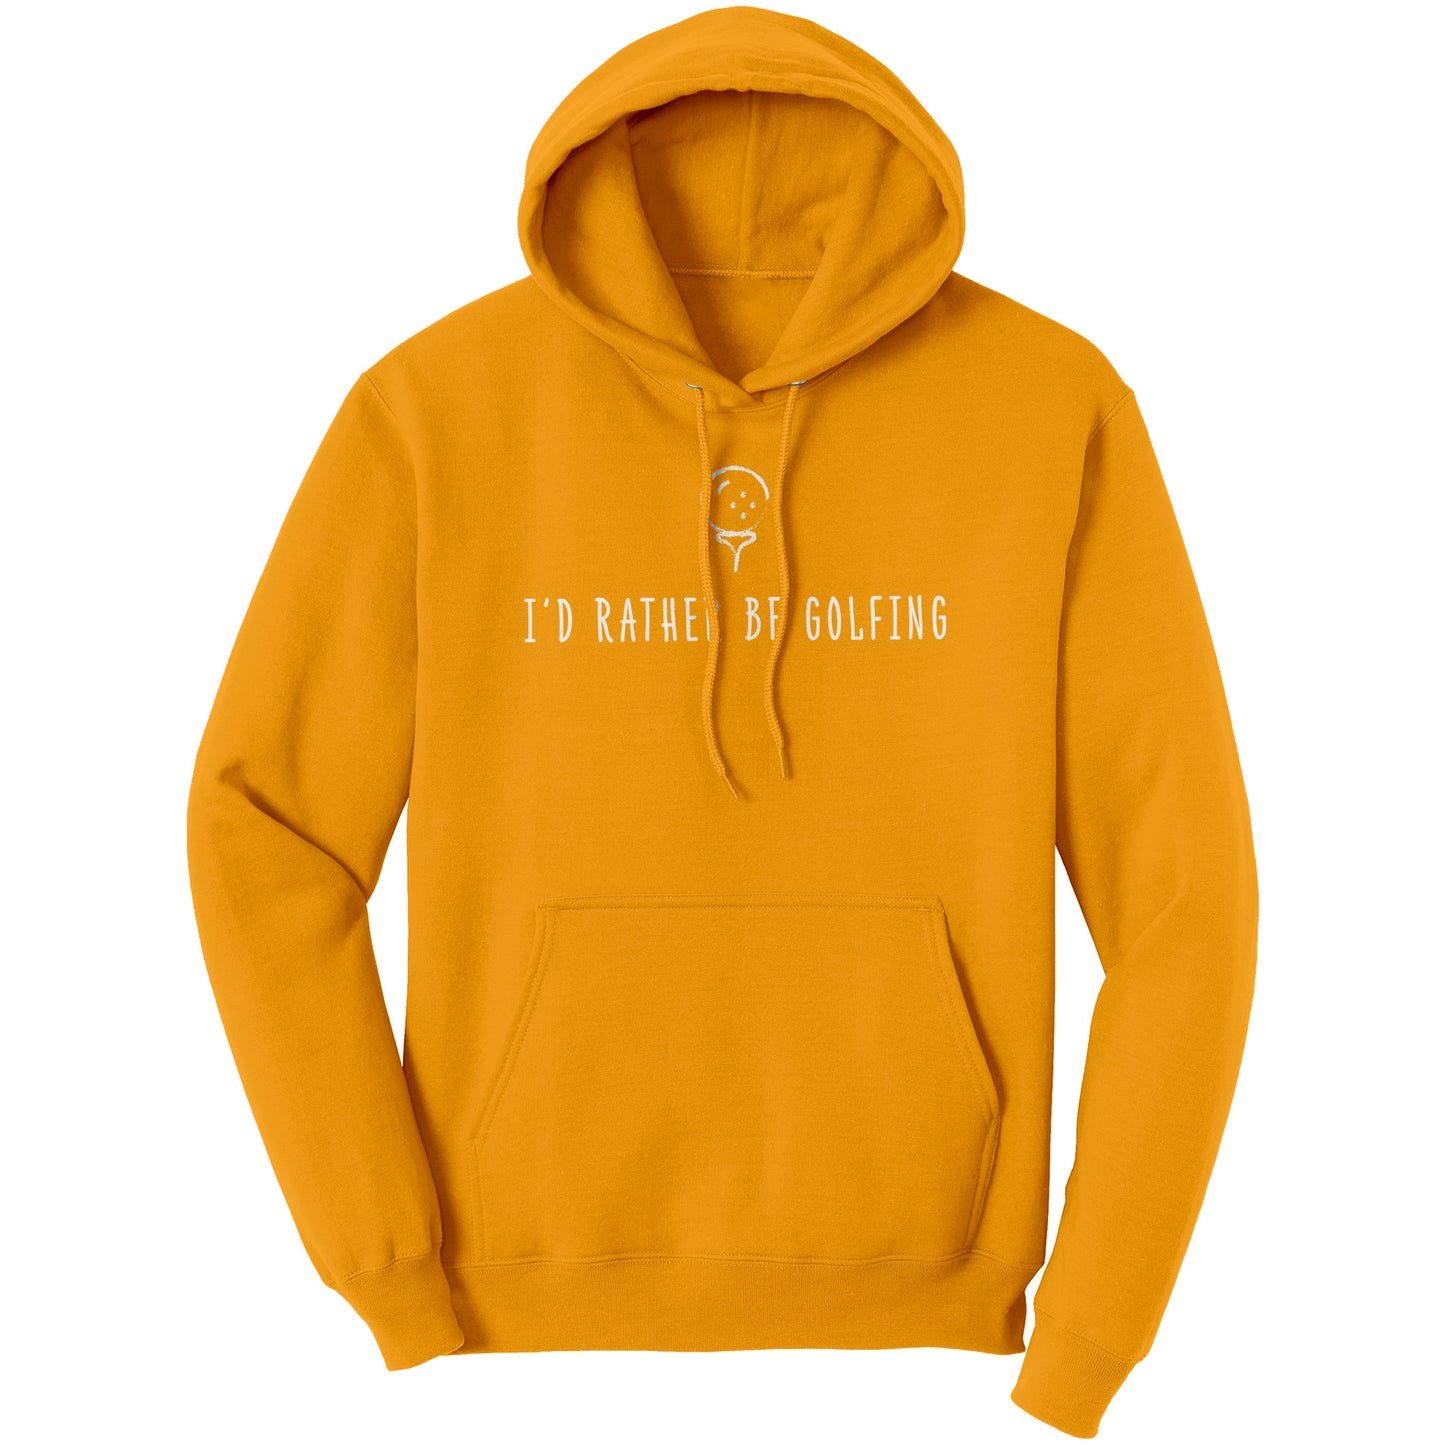 "I'd Rather Be Golfing" Hoodie (White)